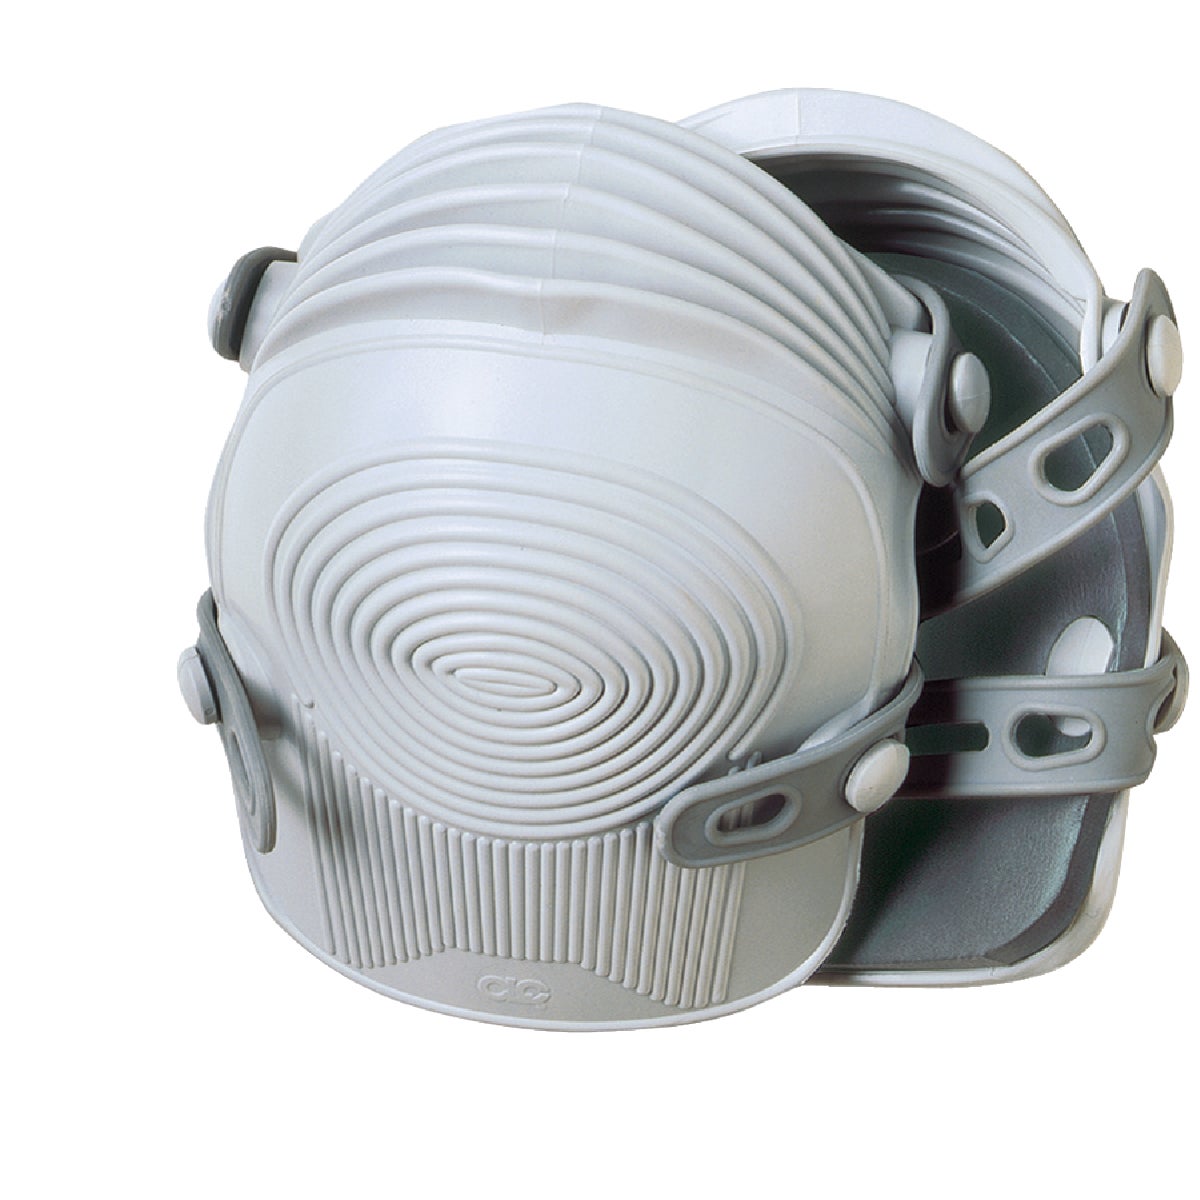 Item 375357, Durable kneepads ideal for floor and roofing trade.